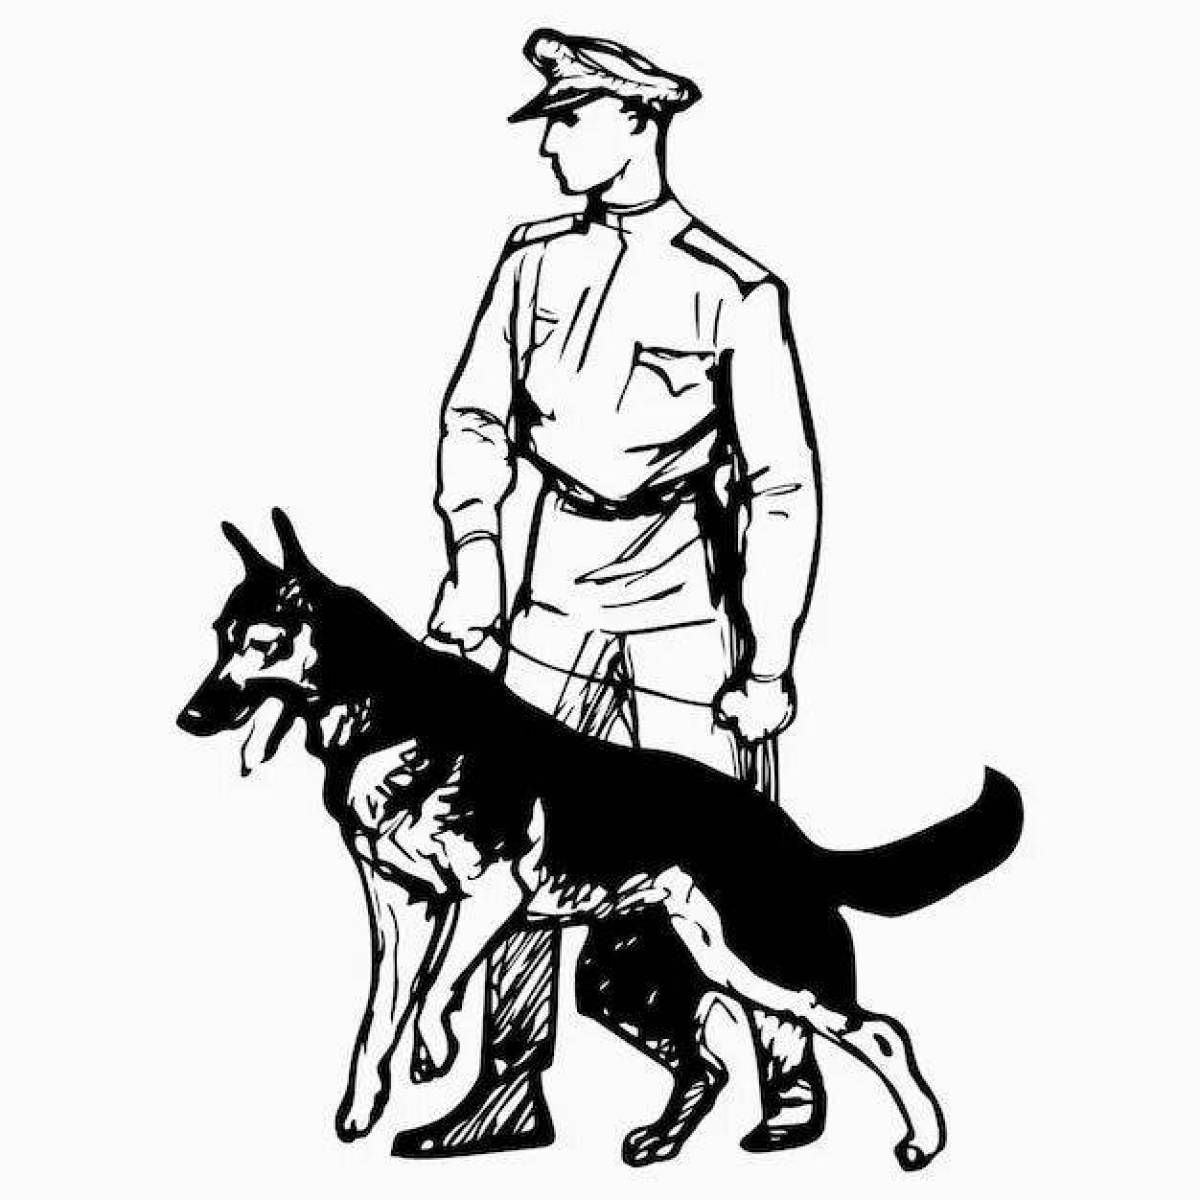 Courageous border guard with a dog